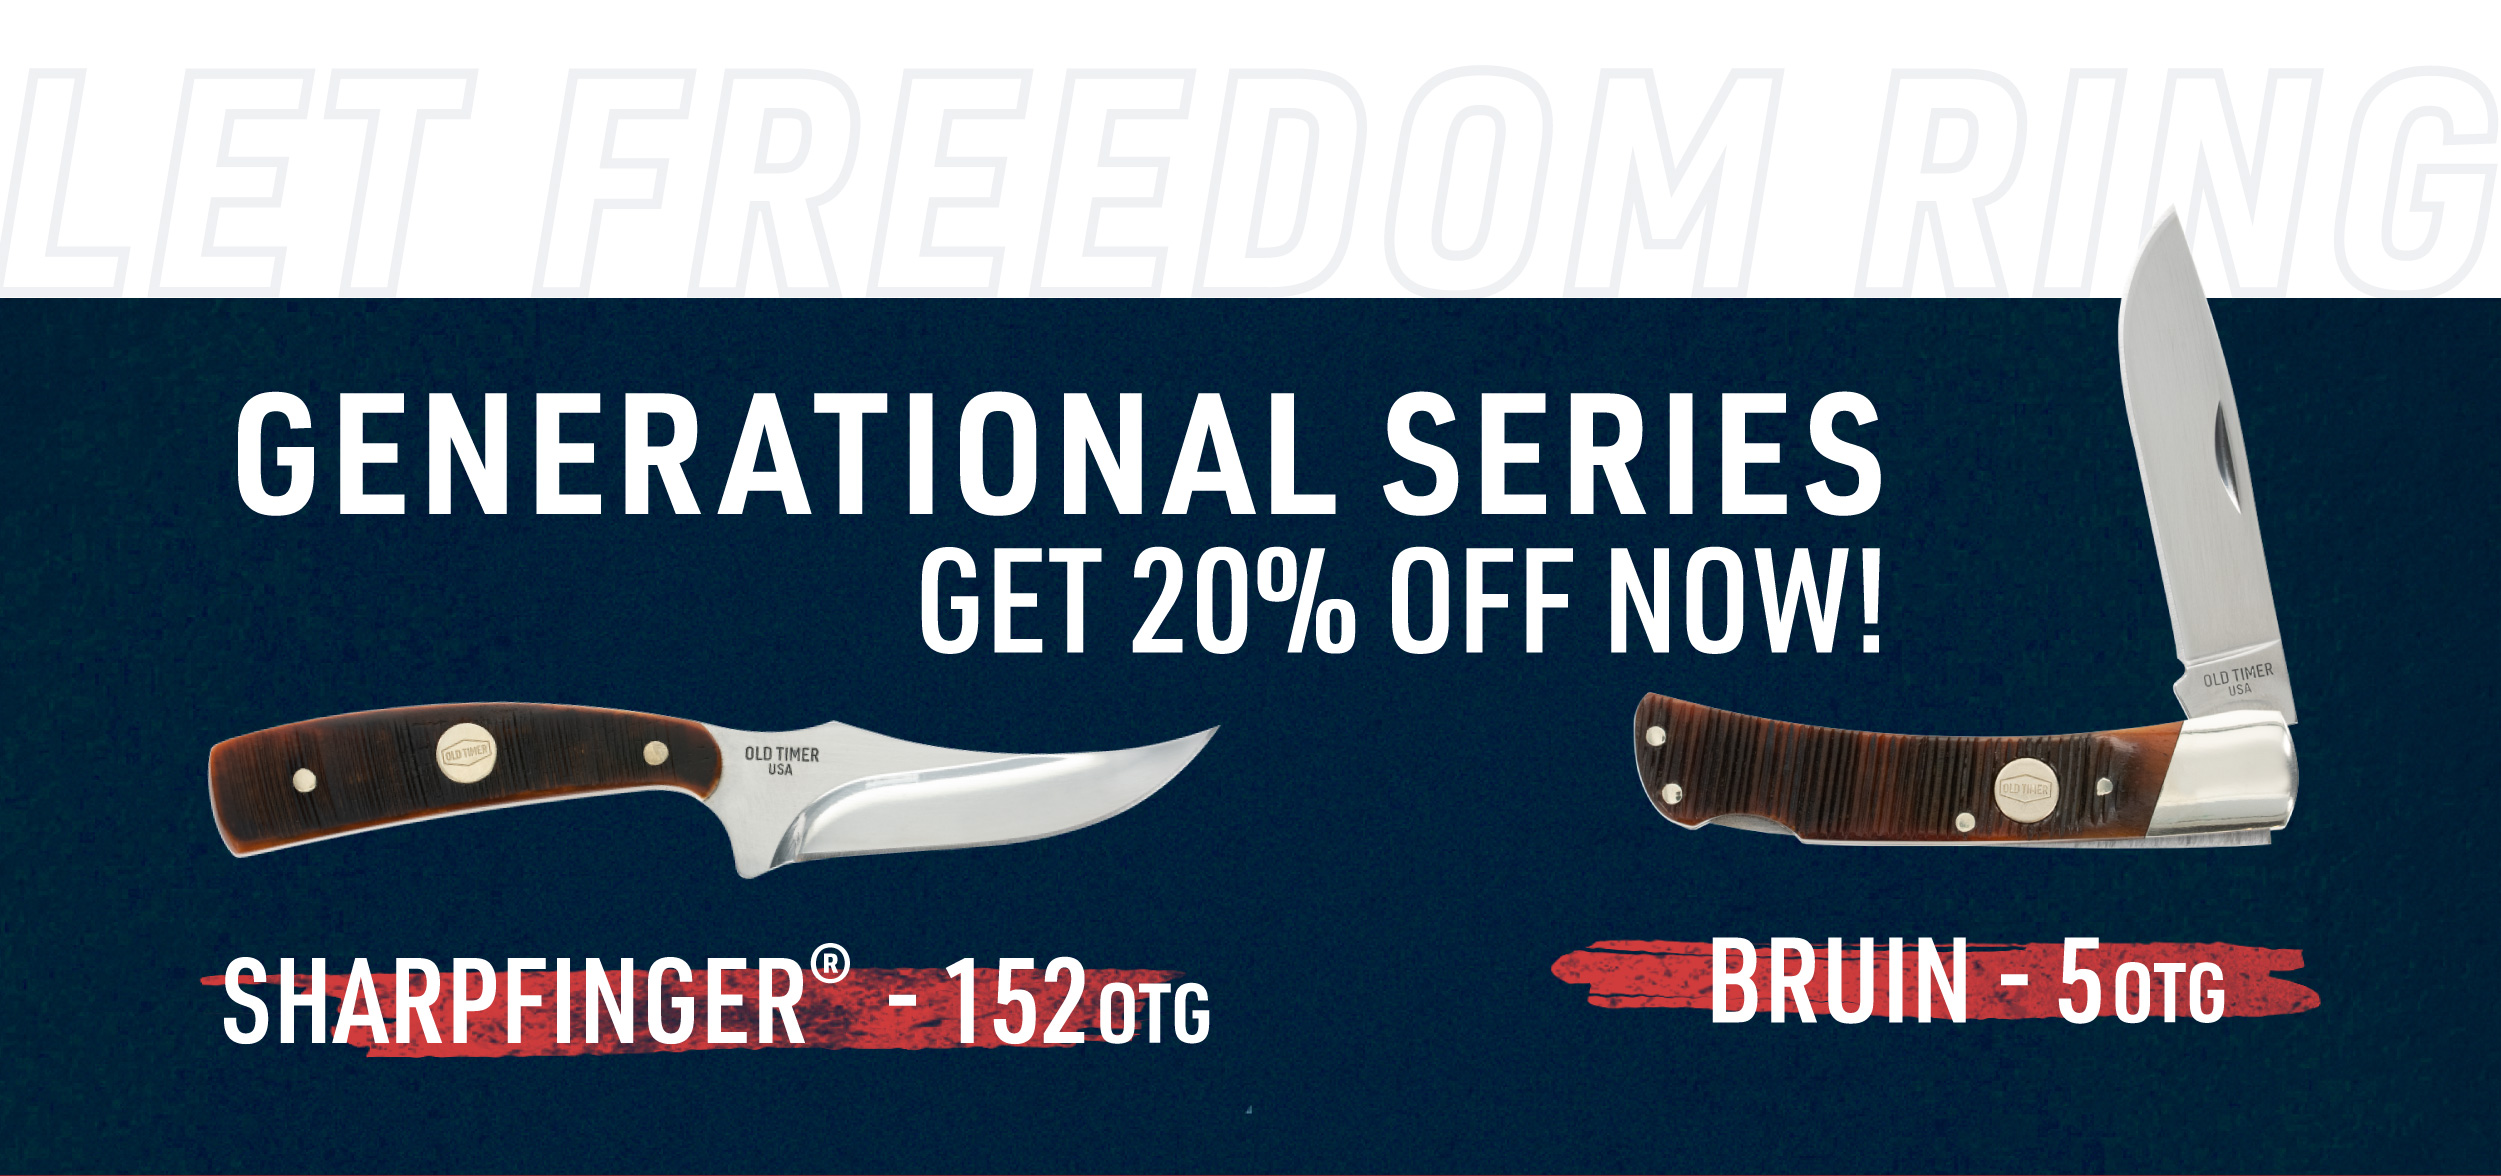 GENERATIONAL SERIES GET 20% OFF NOW!